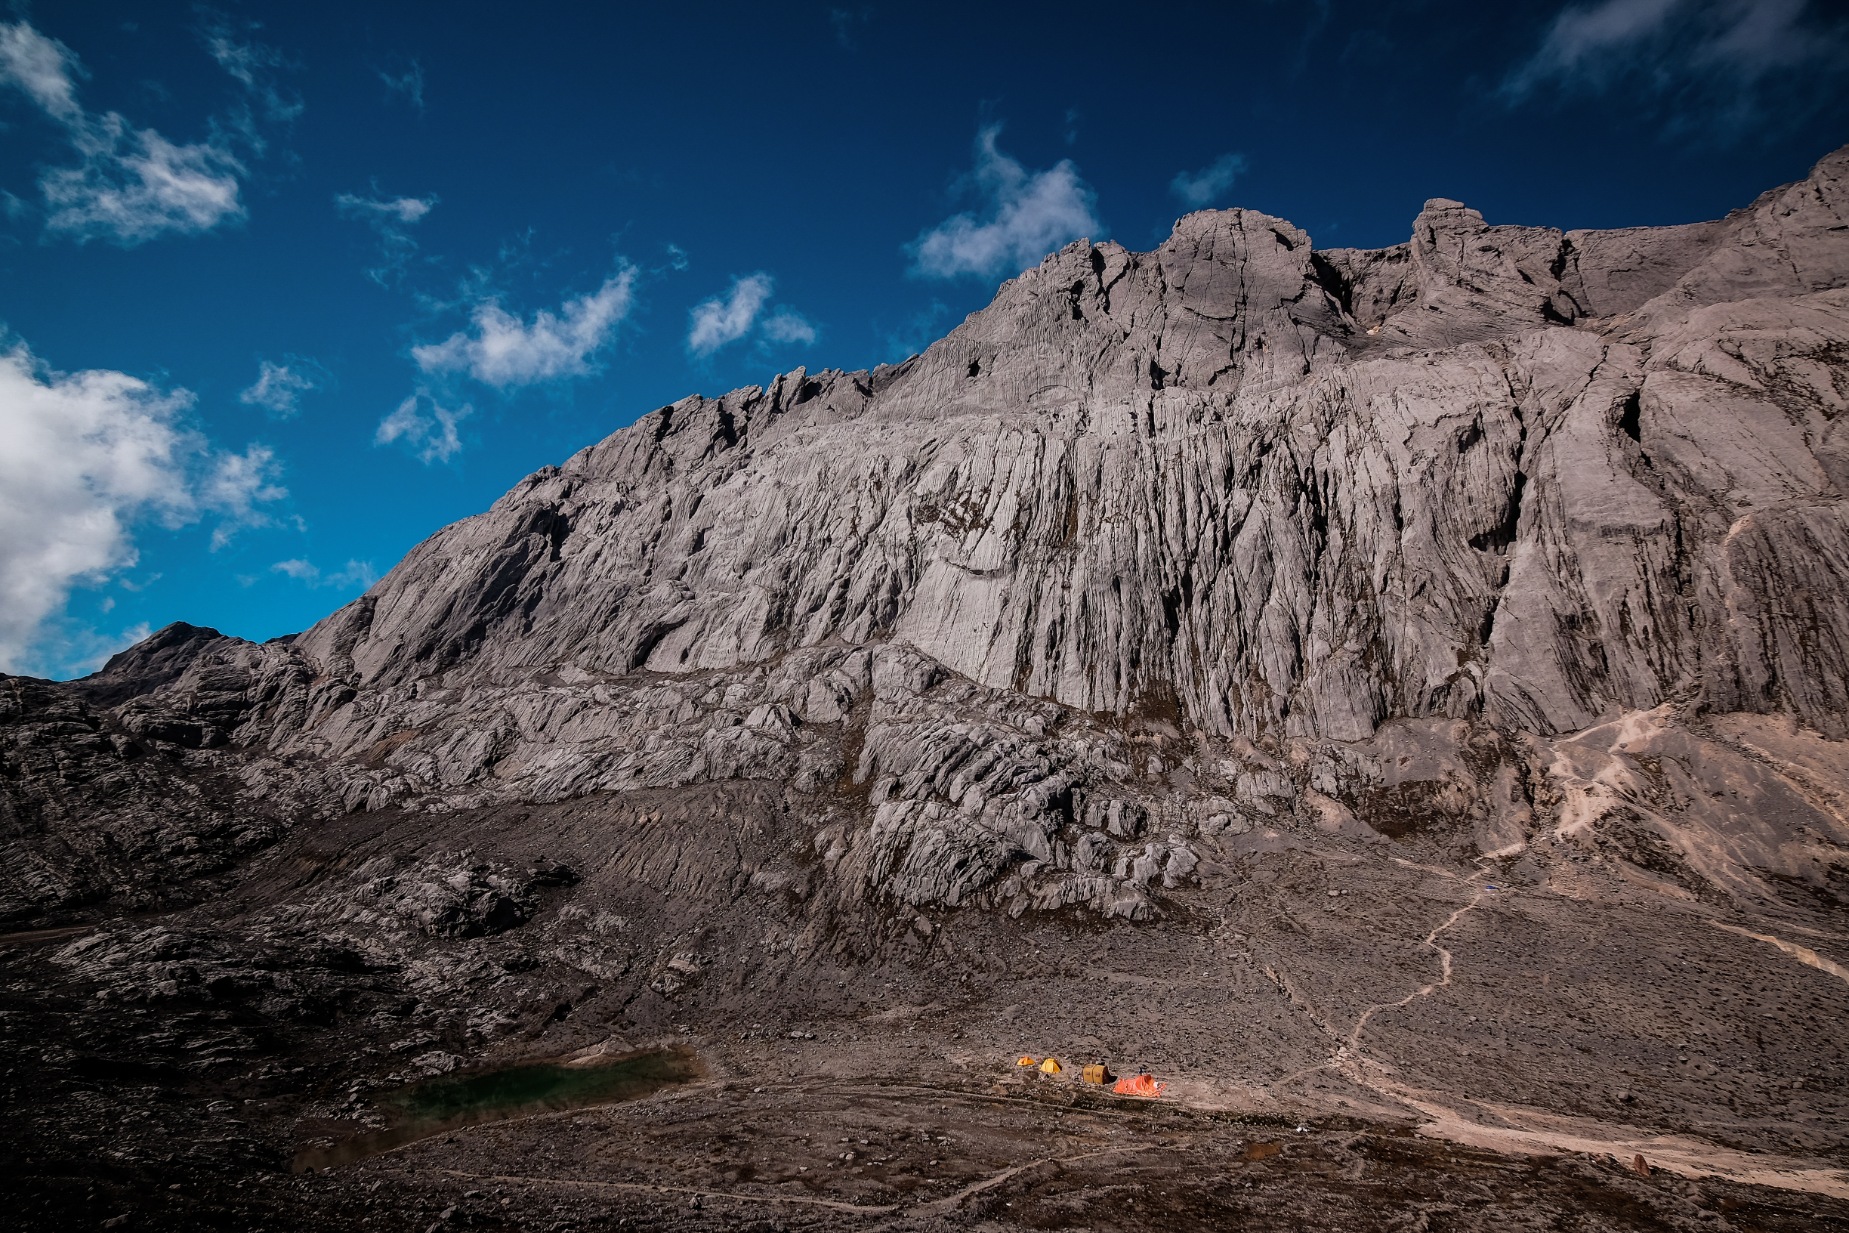 Carstensz Pyramid Expedition base camp